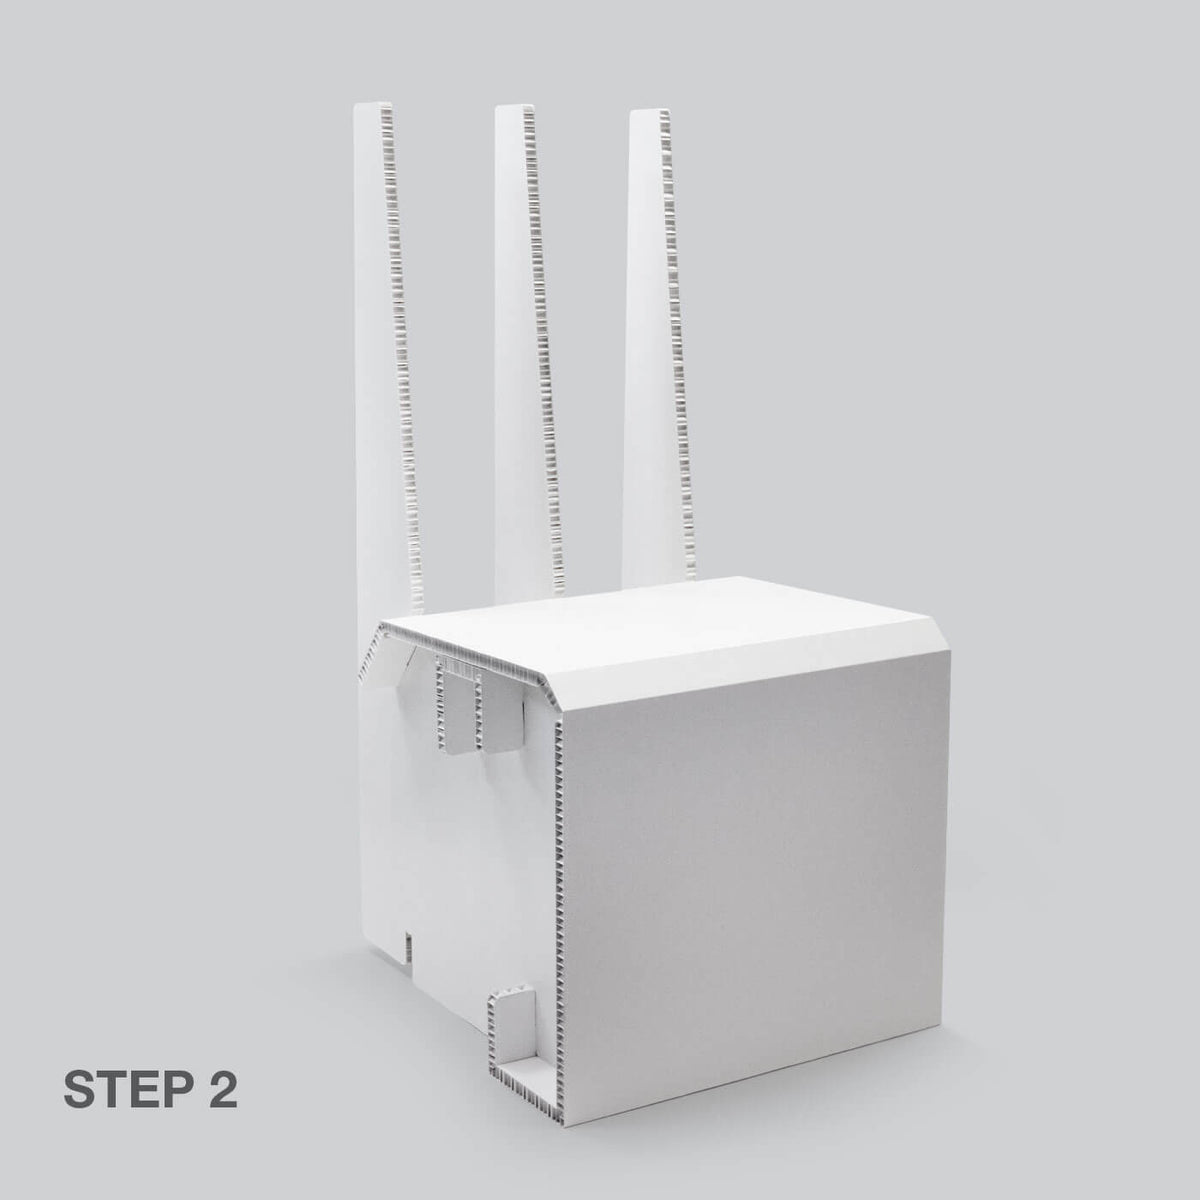 Stage 2 of White Chair for temporary home office solutions by Dufaylite